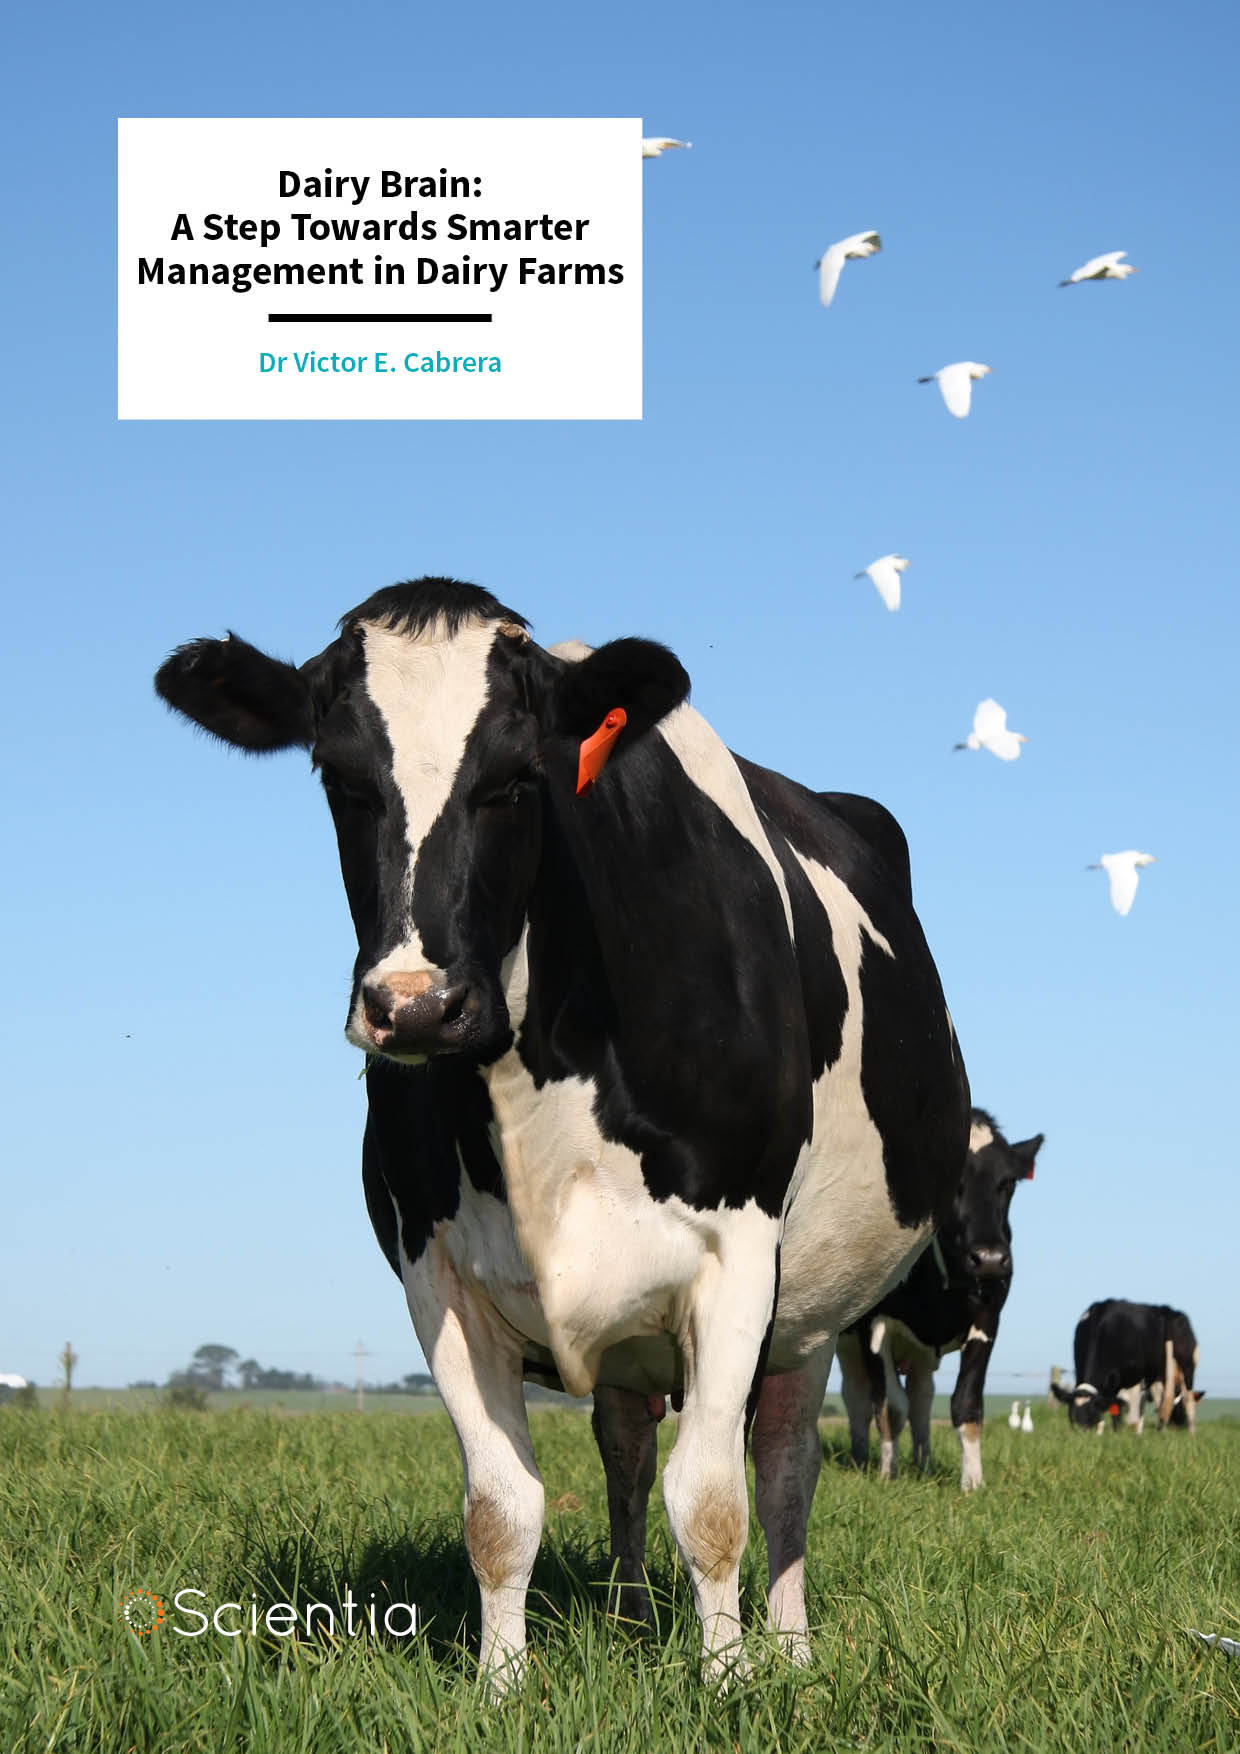 Dr Victor E. Cabrera – Dairy Brain: A Step Towards Smarter Management in Dairy Farms